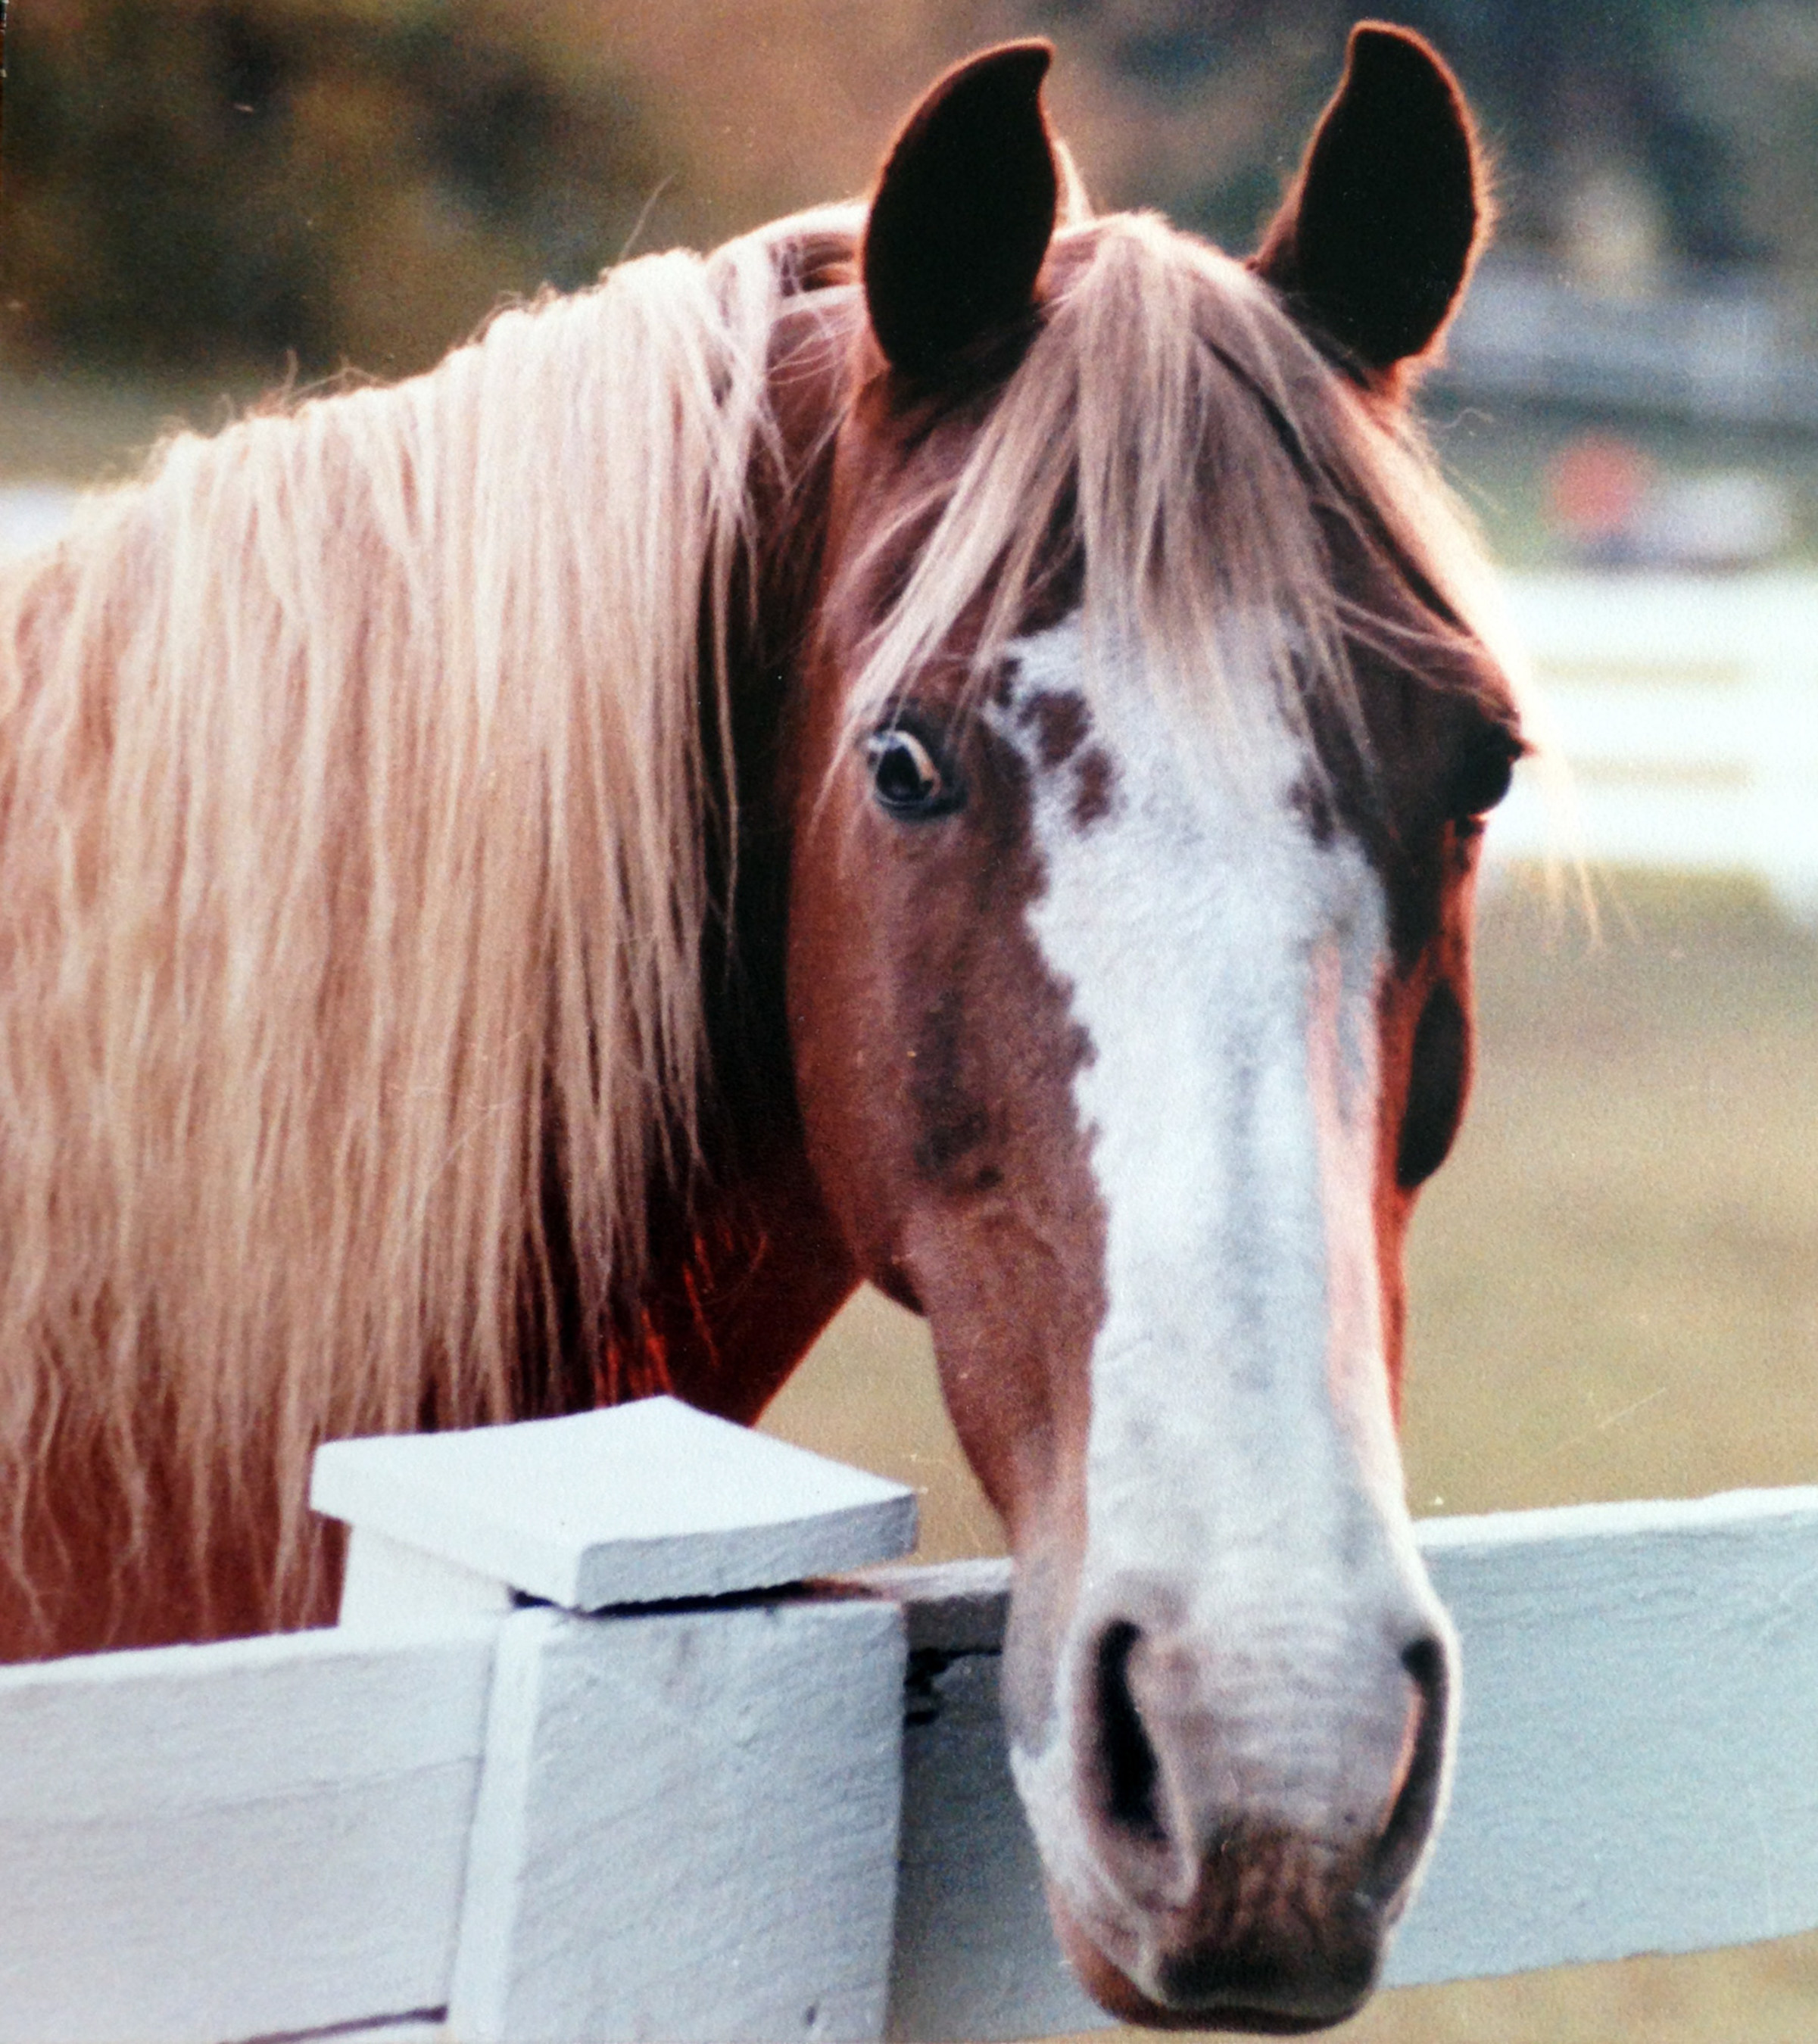 AVMA and AAEP oppose efforts to stall proposed rule to enforce the Horse Protection Act. They say unnecessary delays in long overdue changes will result in more injury to horses.